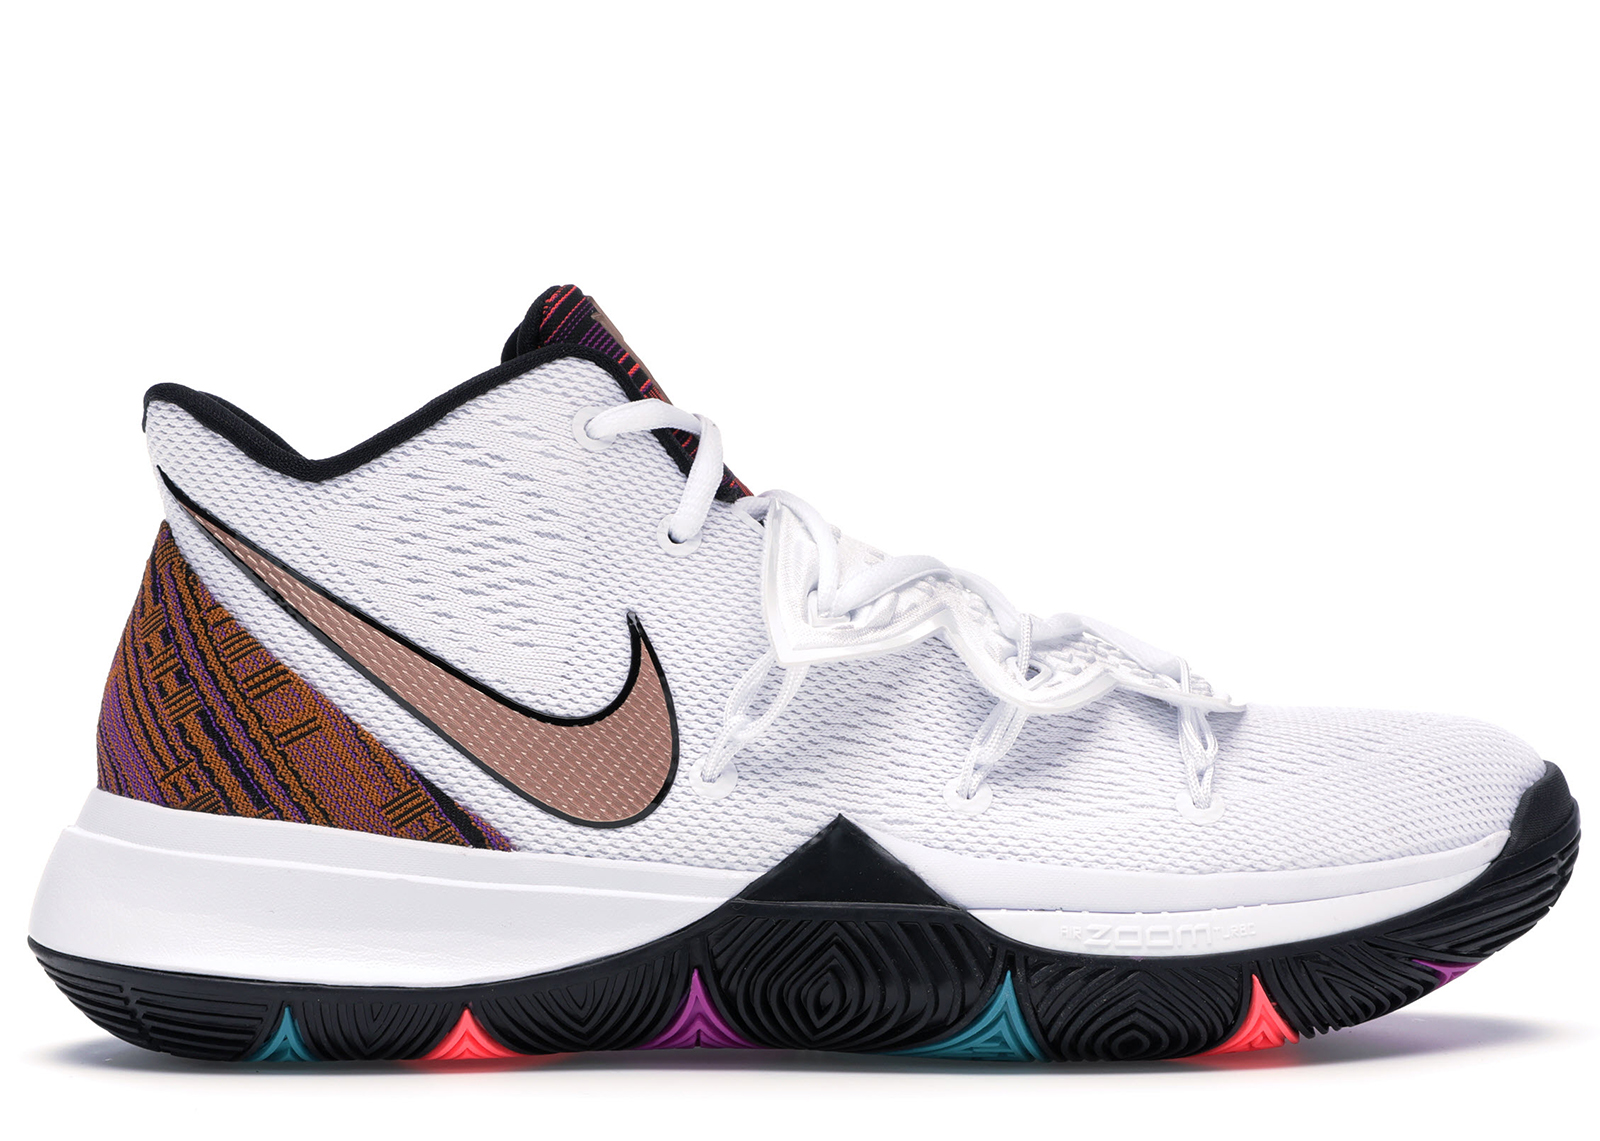 kyrie shoes bhm